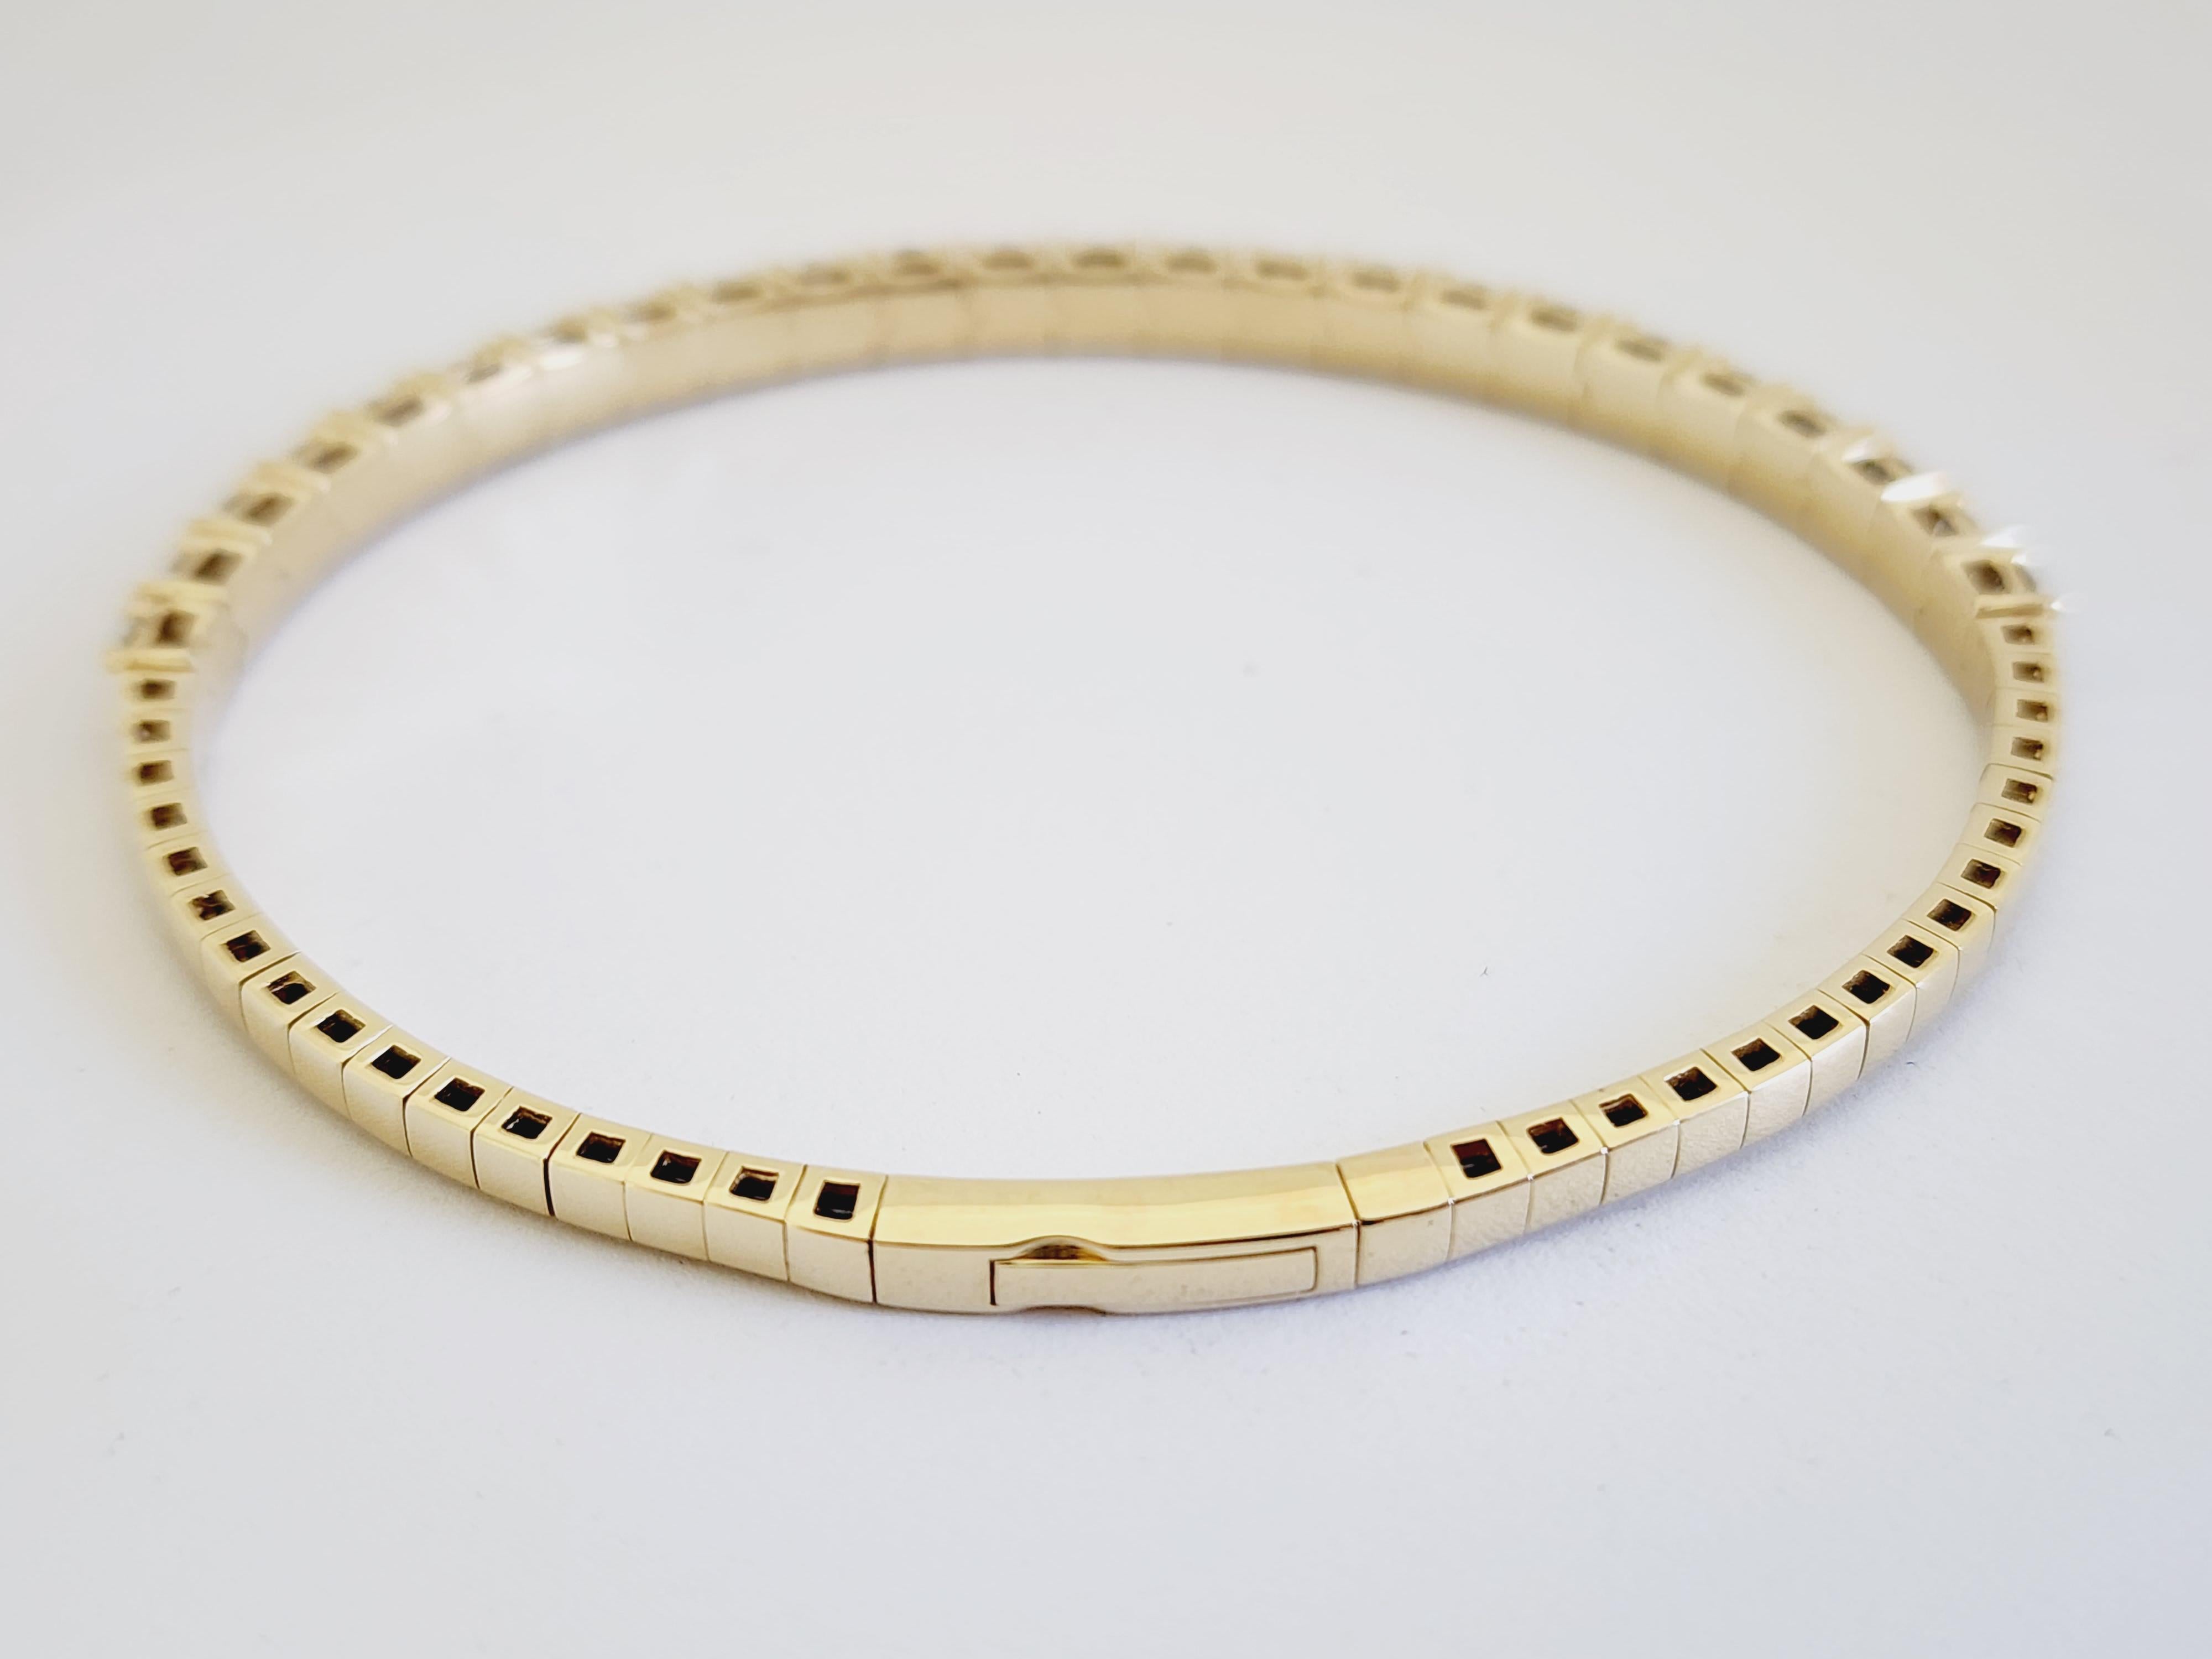 3.73 Carat Flexible Bangle Yellow Gold 14 Karat Bracelet In New Condition For Sale In Great Neck, NY